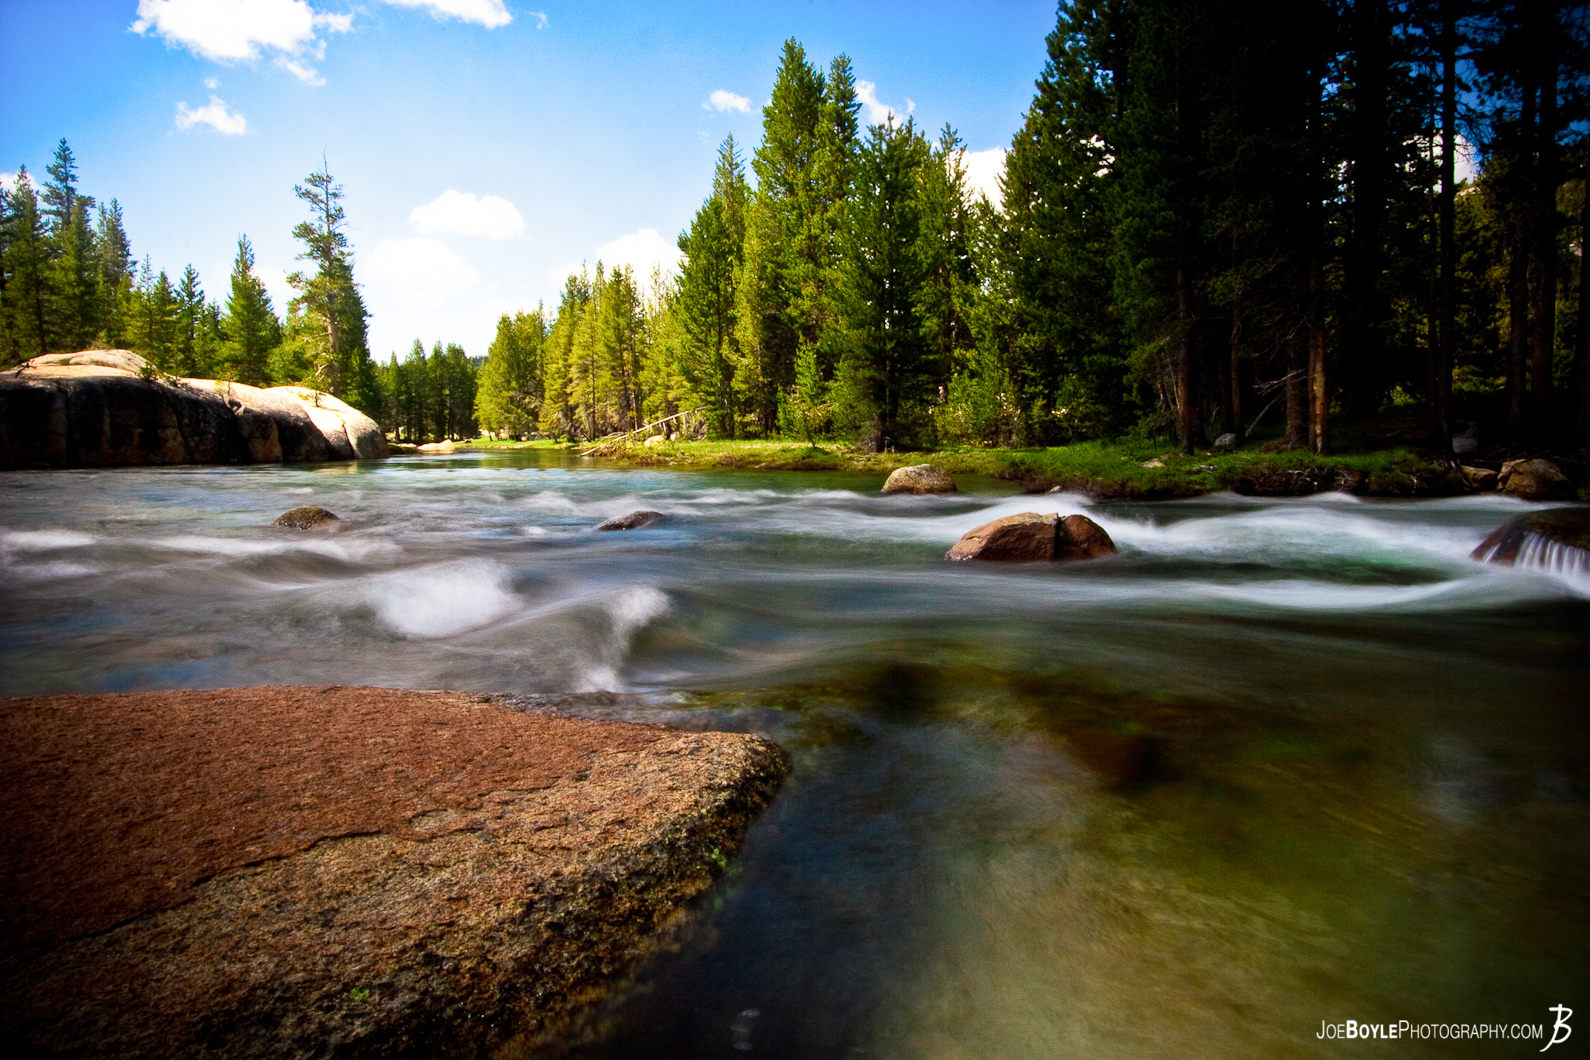  This photo won a "Best Image of the Week Award" for being in the top 10% on Pixoto.com. I took this photo as I was hiking the John Muir Trial in the Sierra Nevada mountain range. I didn't chronicle the name of this river but I do know that it is on the northern section of the JMT. It was a fantastic trip and I would love to be able to spend more time out there to take pictures. 